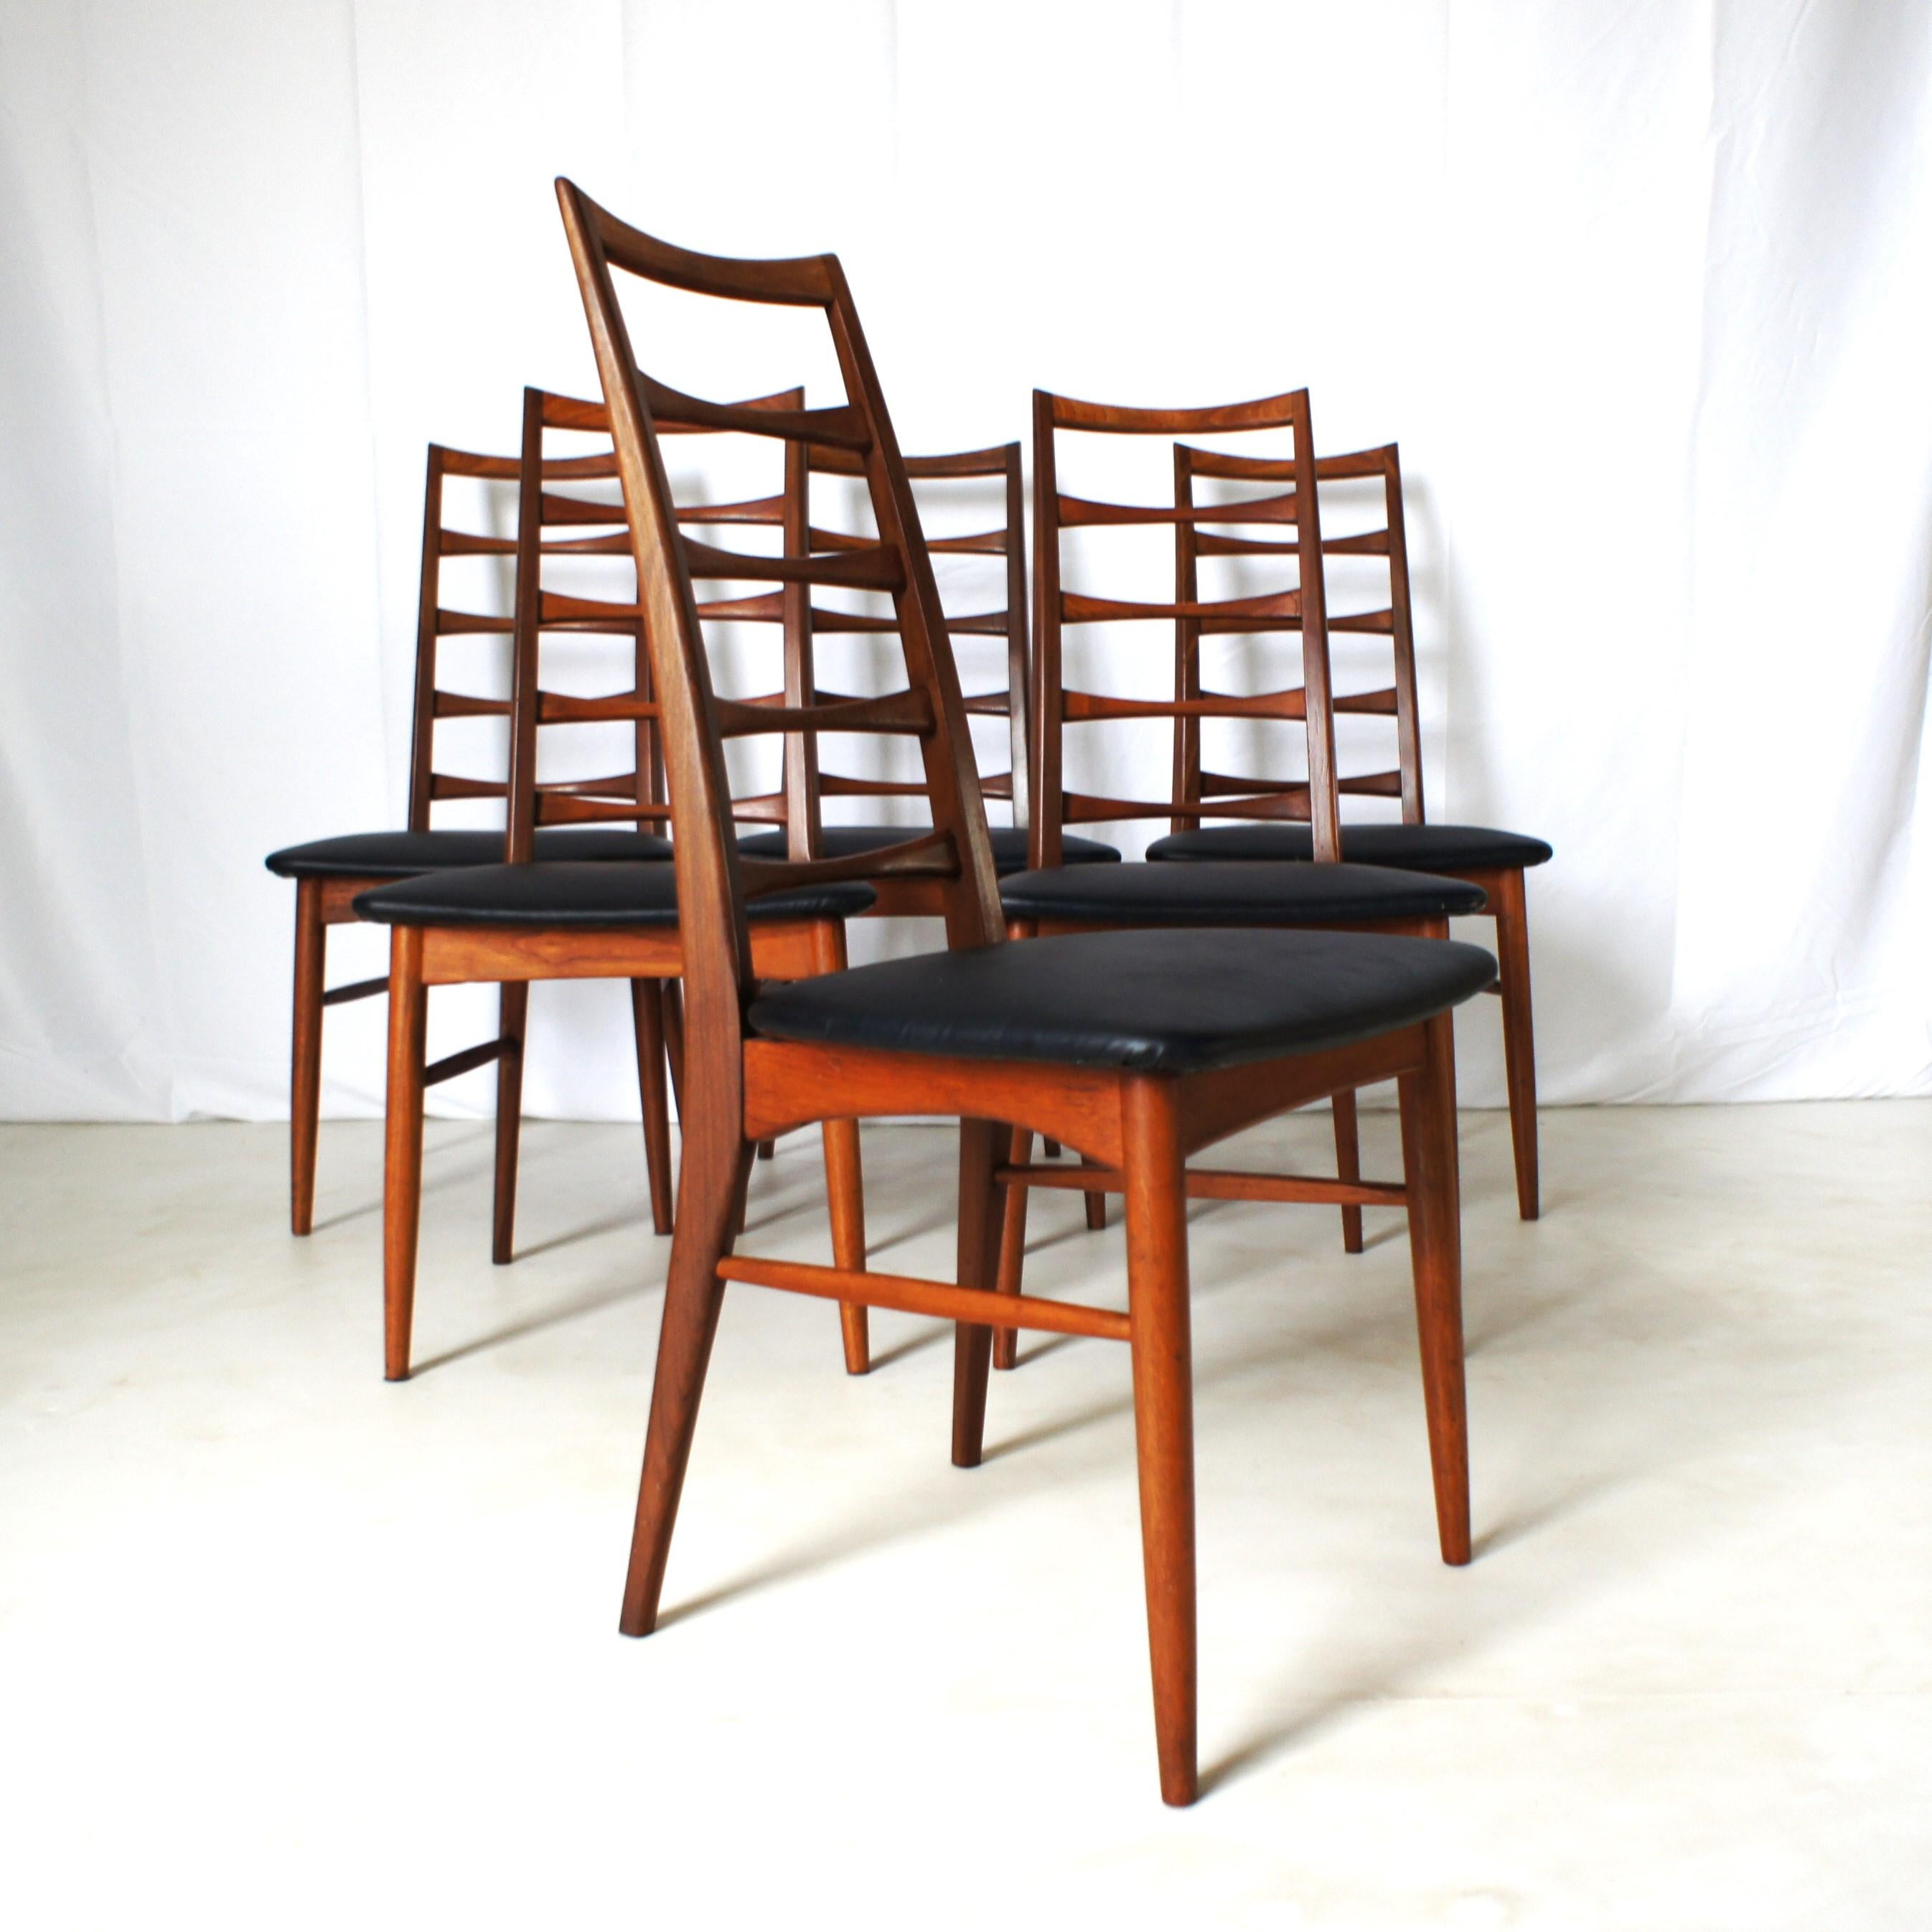 Series of six Scandinavian chairs in solid teak, black imitation leather seats, 